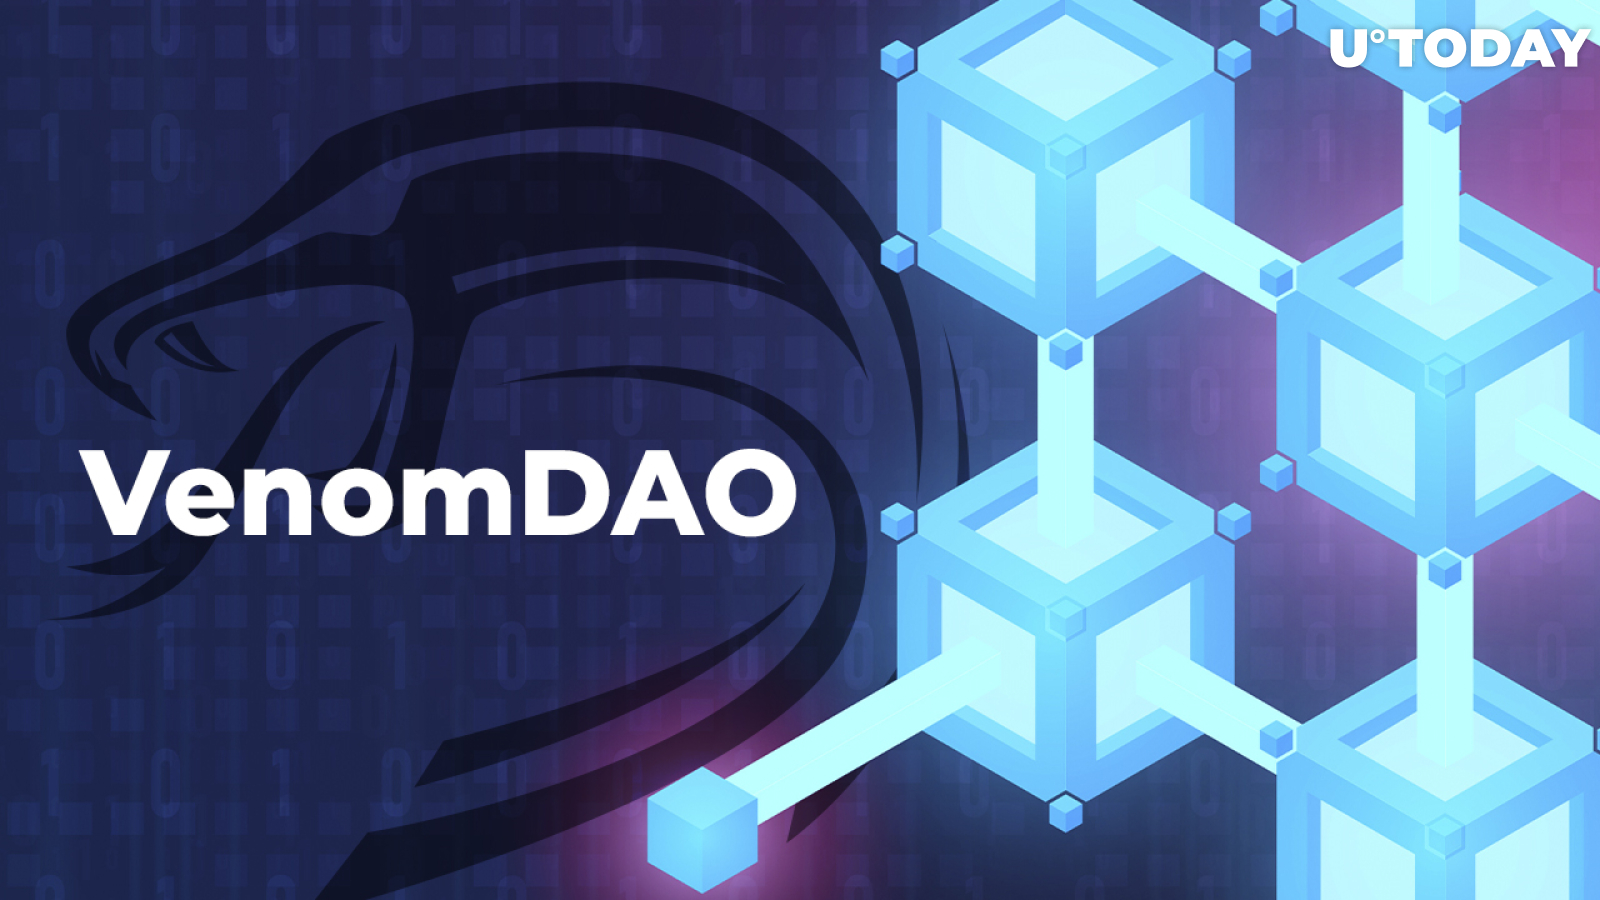 VenomDAO Ready to Introduce Full Liquidity Infrastructure for DeFi Products